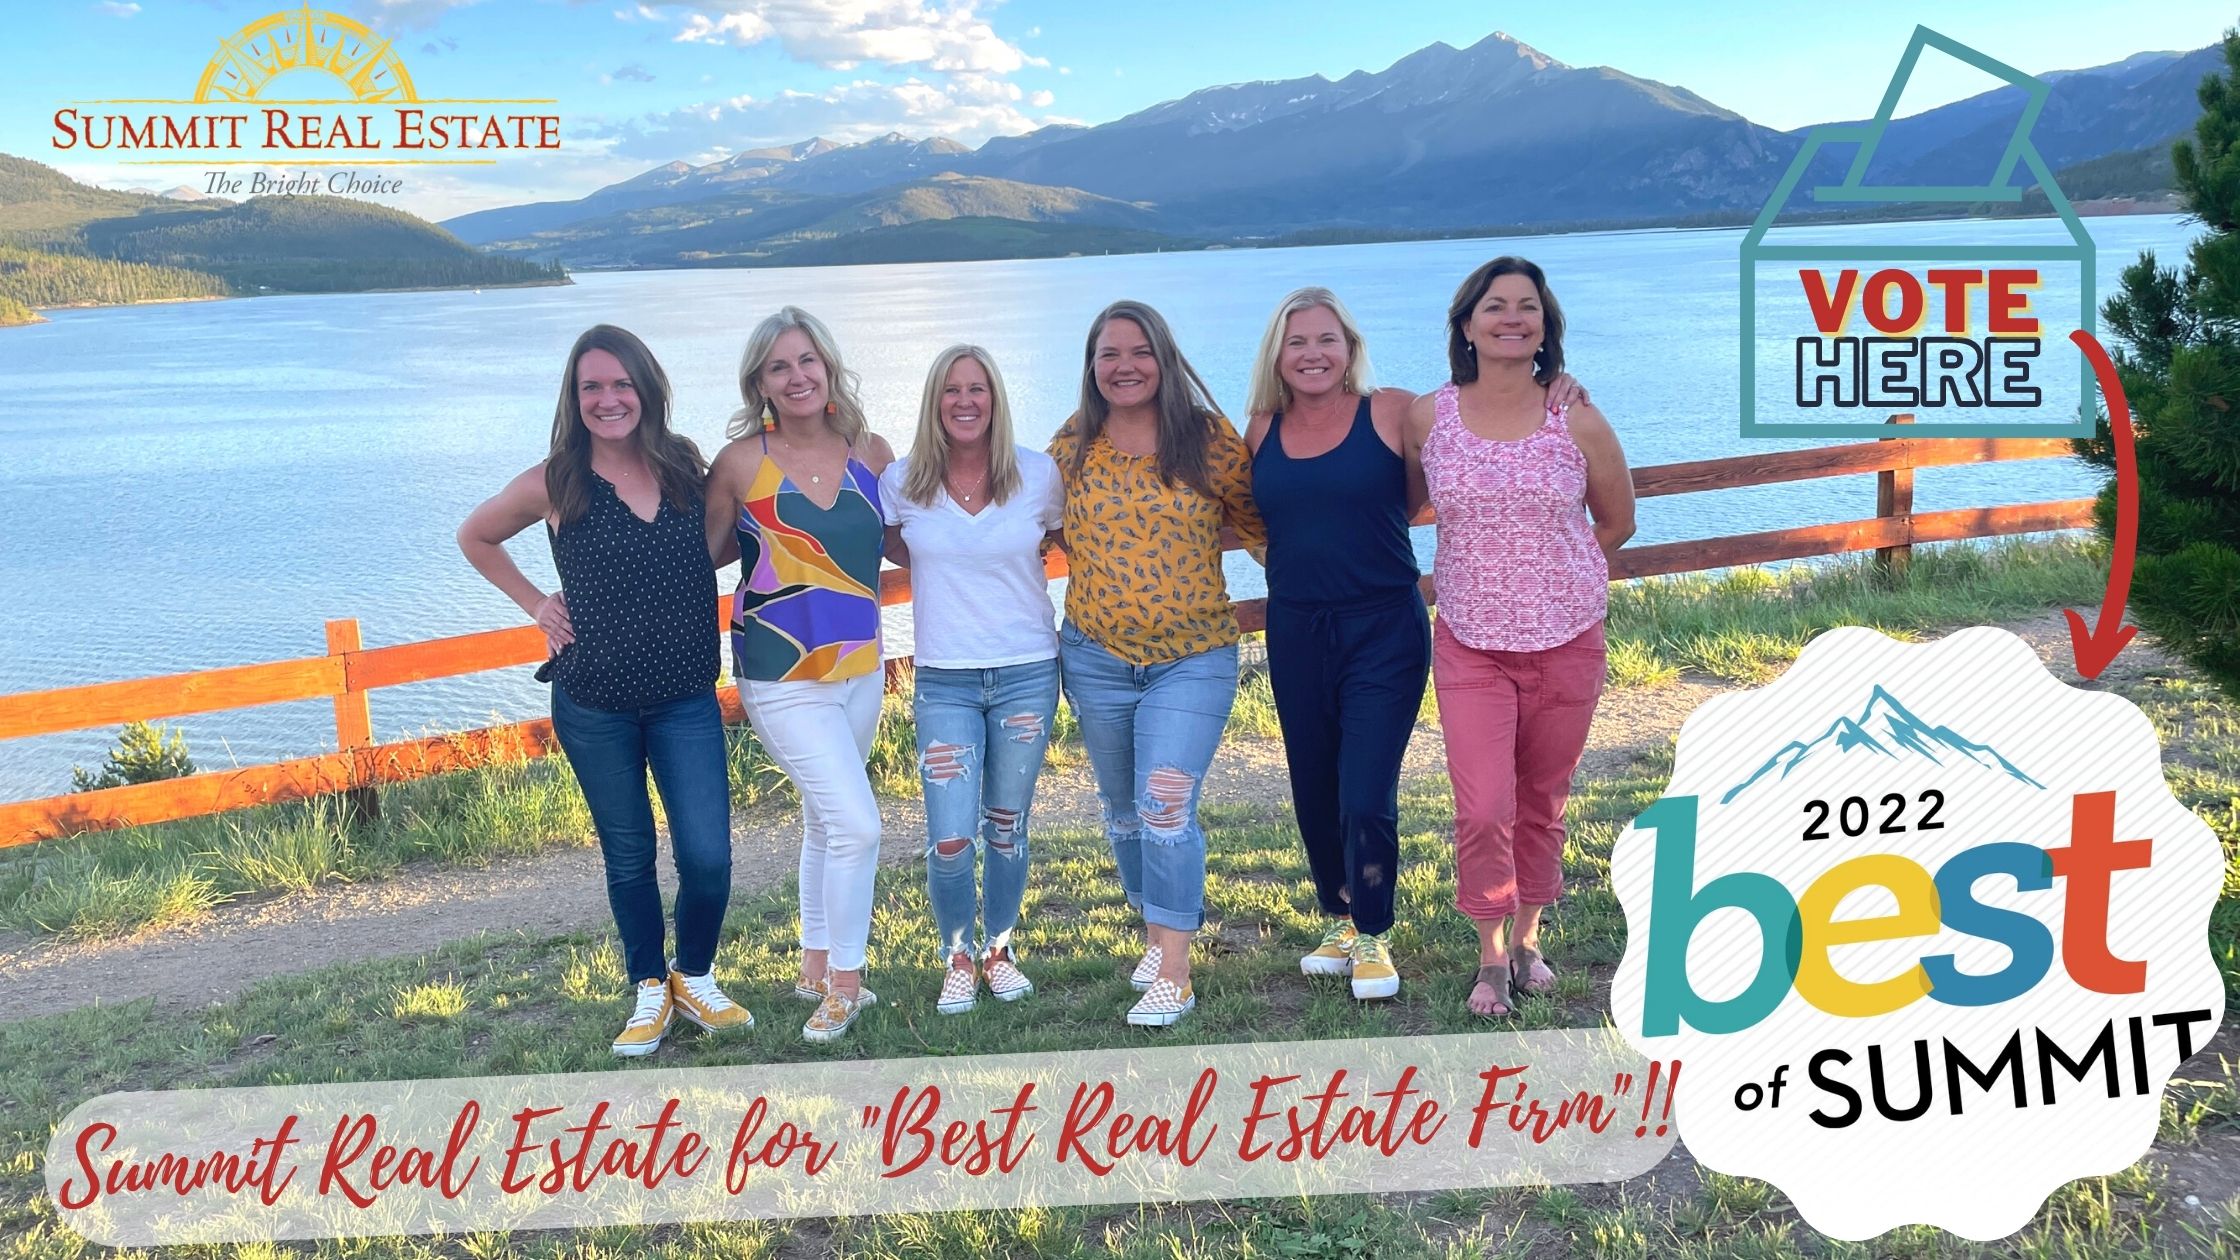 Vote for Summit Real Estate!